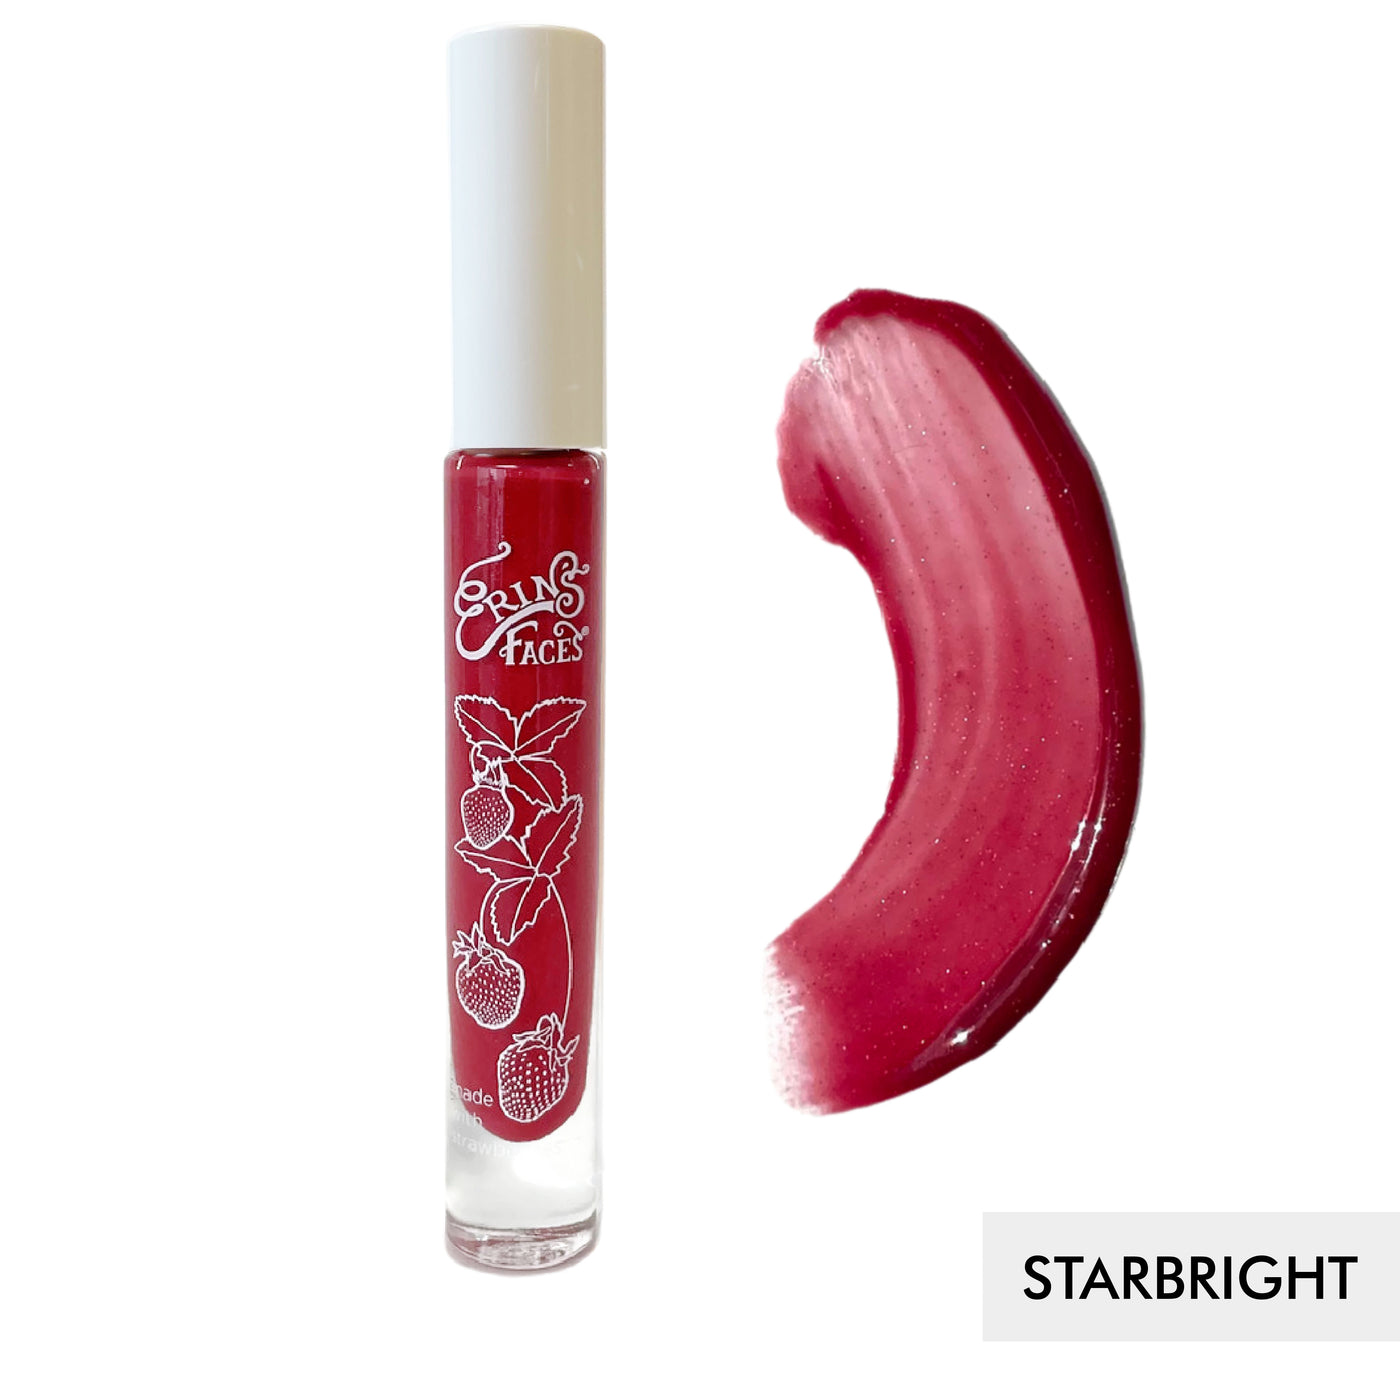 erin's faces fruit smoothie lip gloss bottle and swatch against white background of the shade starbright